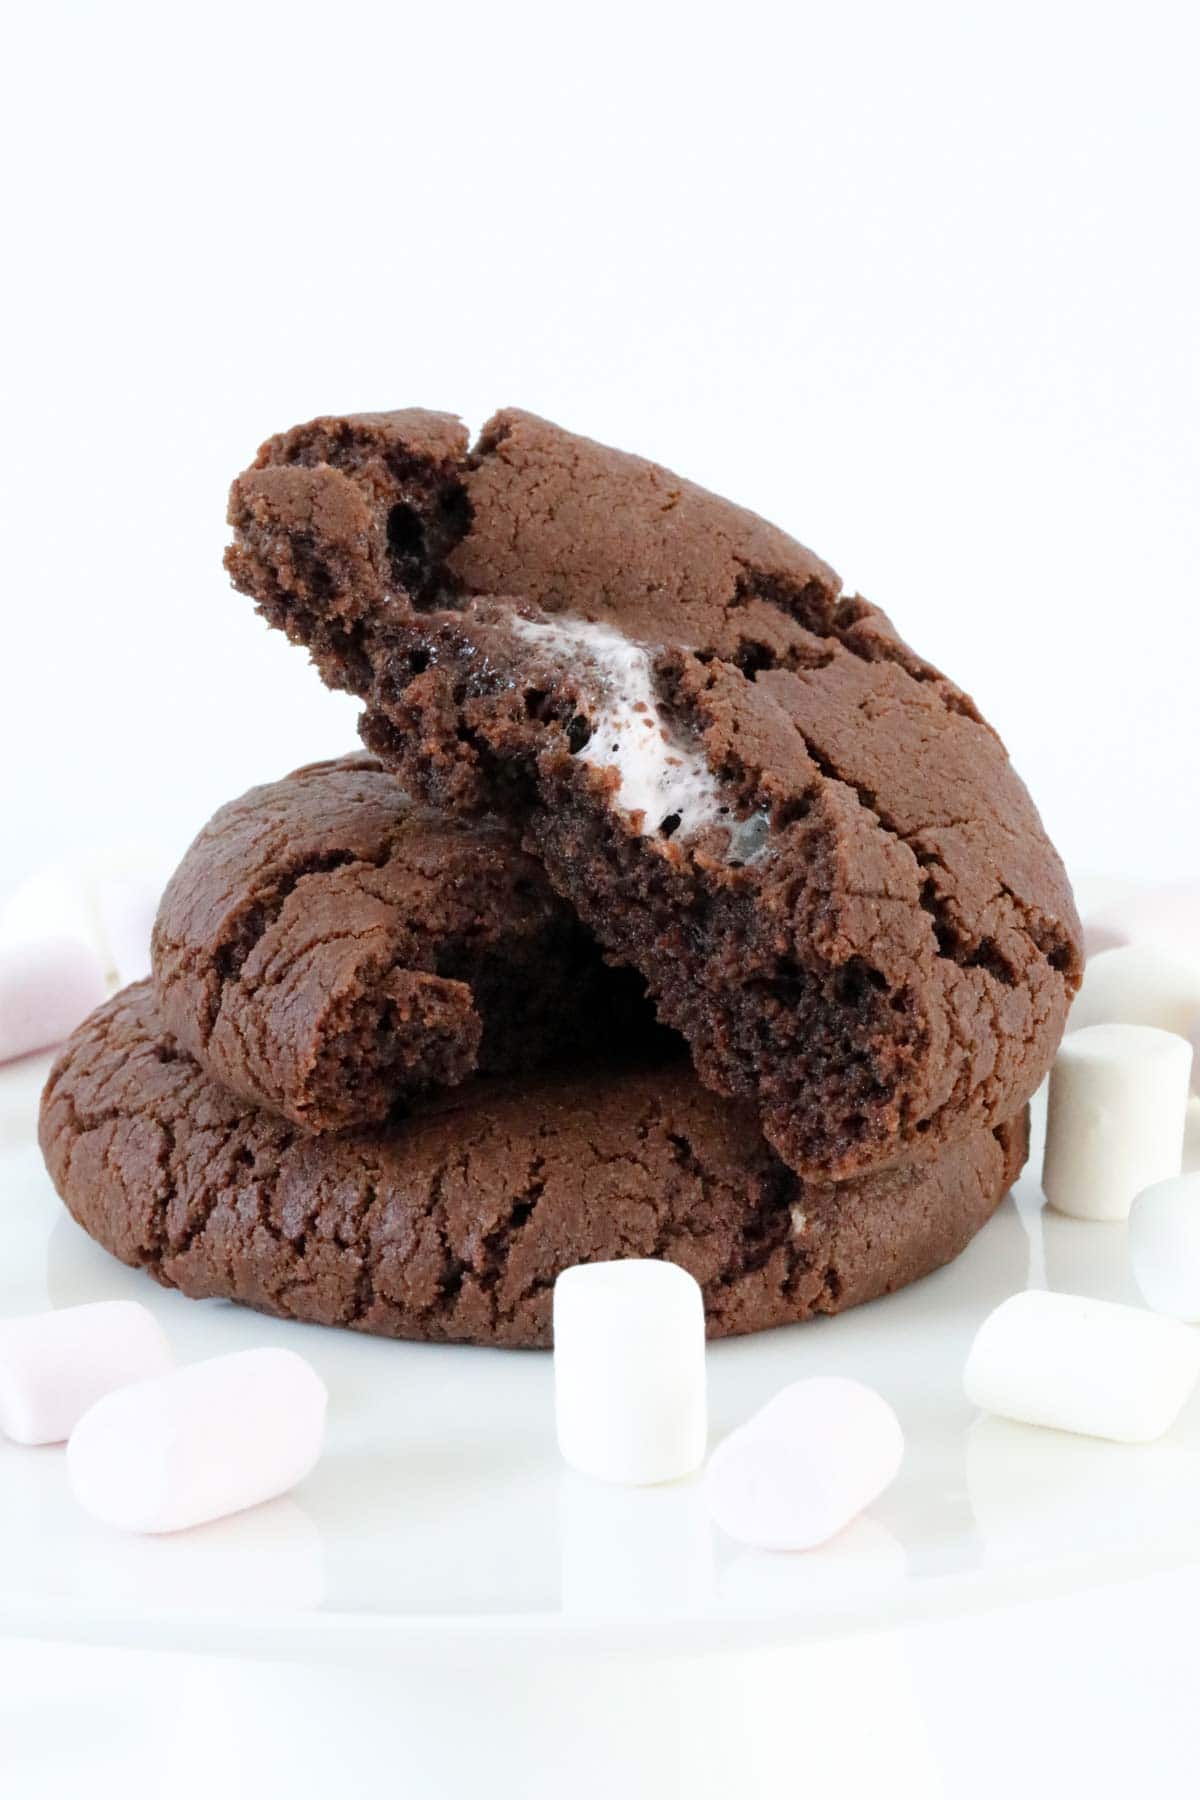 Two chocolate marshmallow cookies, the top one broken in half to show the marshmallow centre.